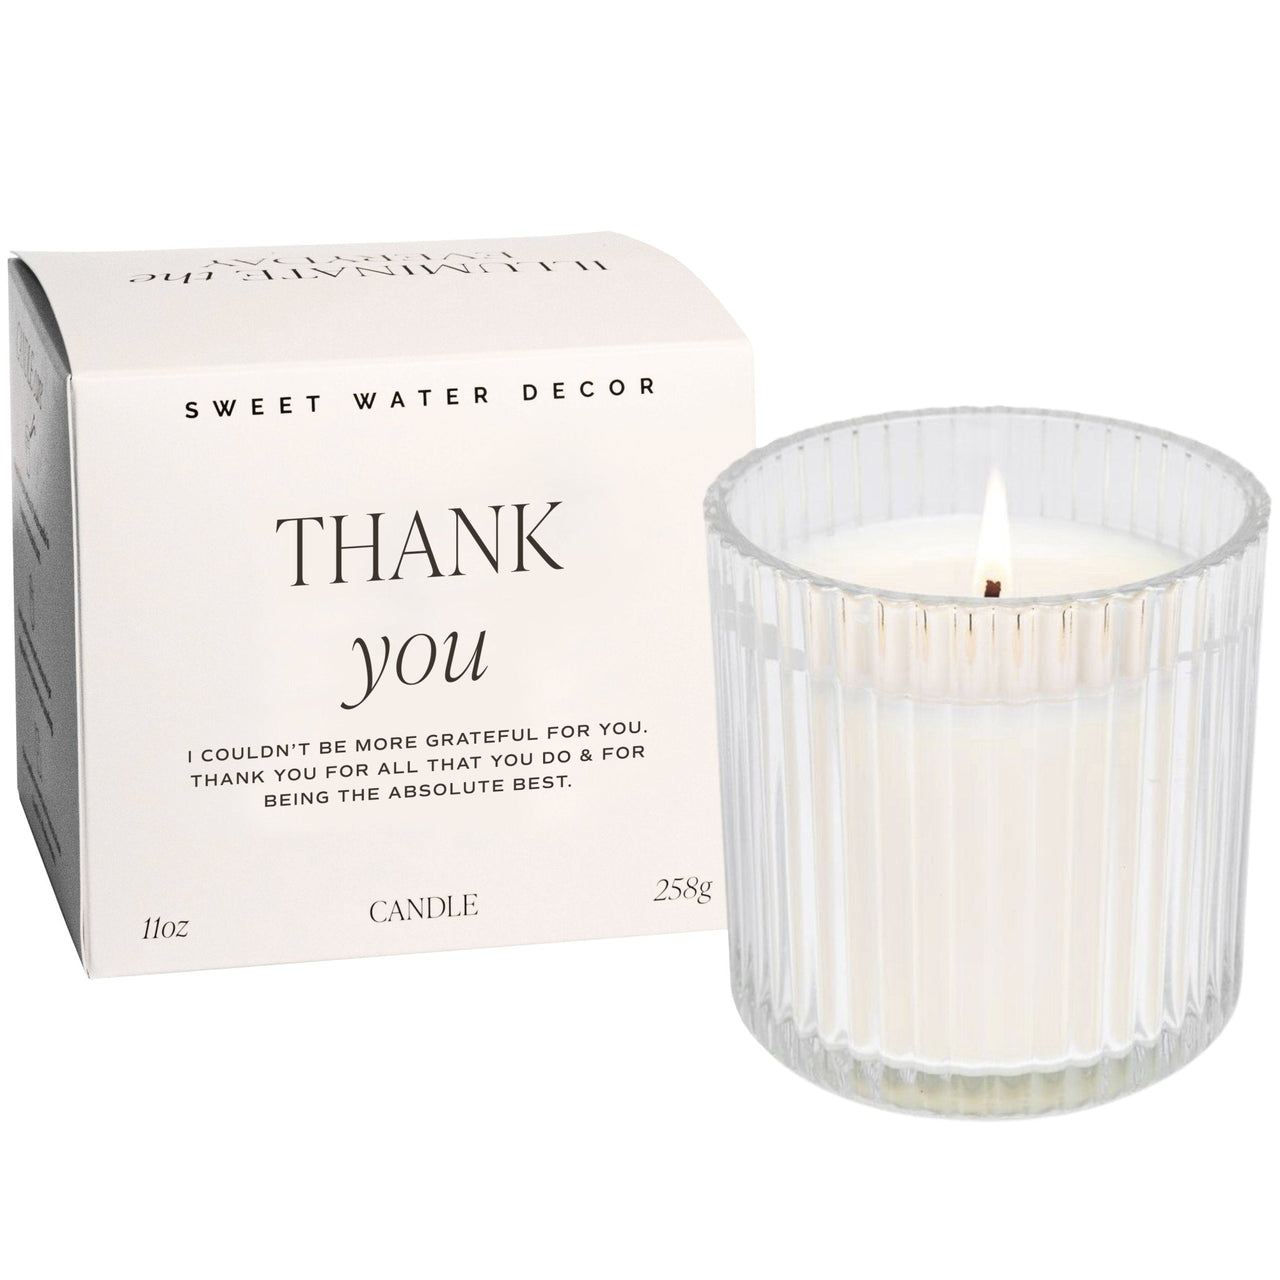 Thank You Soy Candle - Ribbed Glass Jar with Box - 11 oz - Tony's Home Furnishings